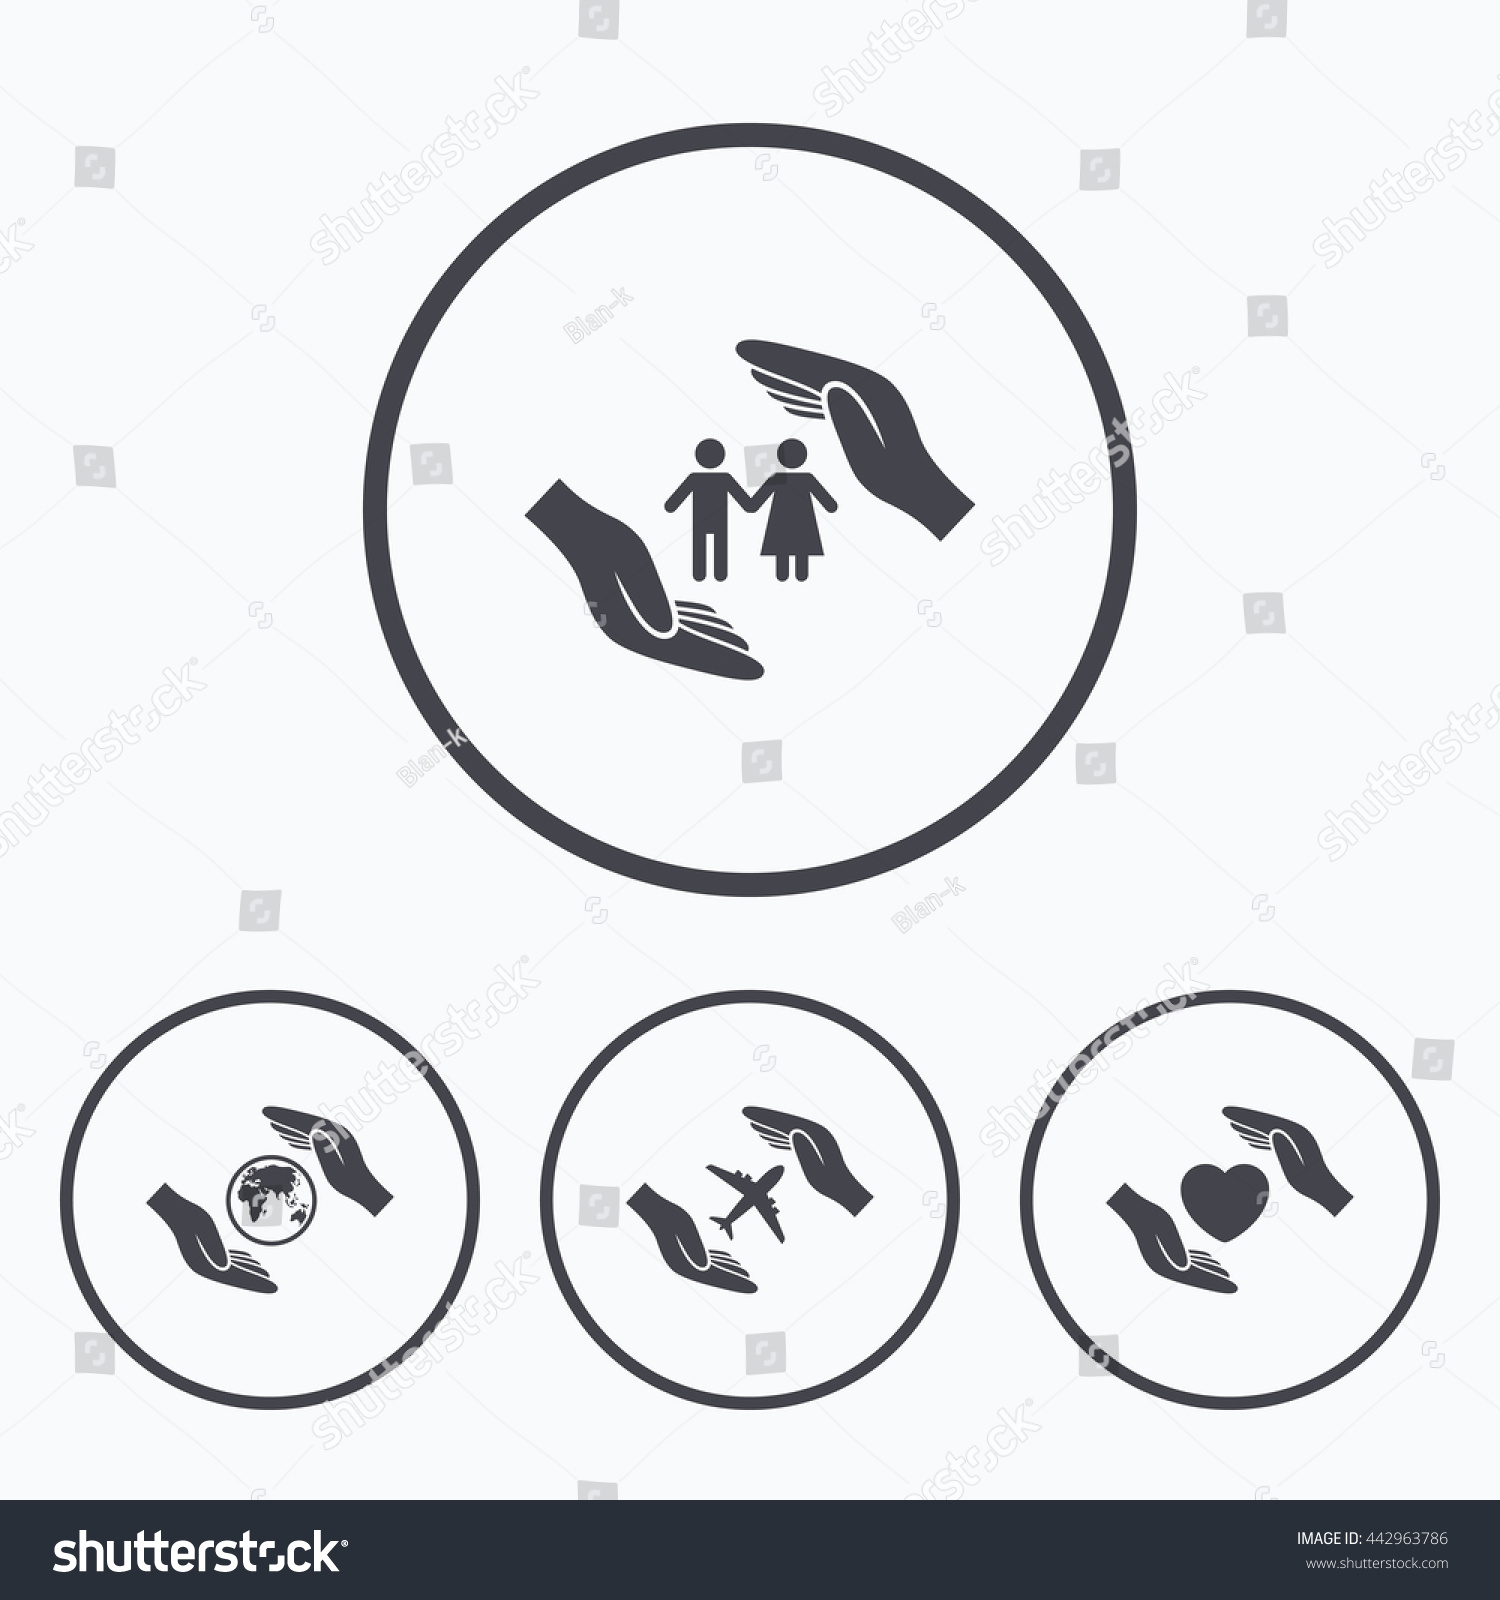 travel life insurance quotes hands insurance icons human life insurance stock illustration